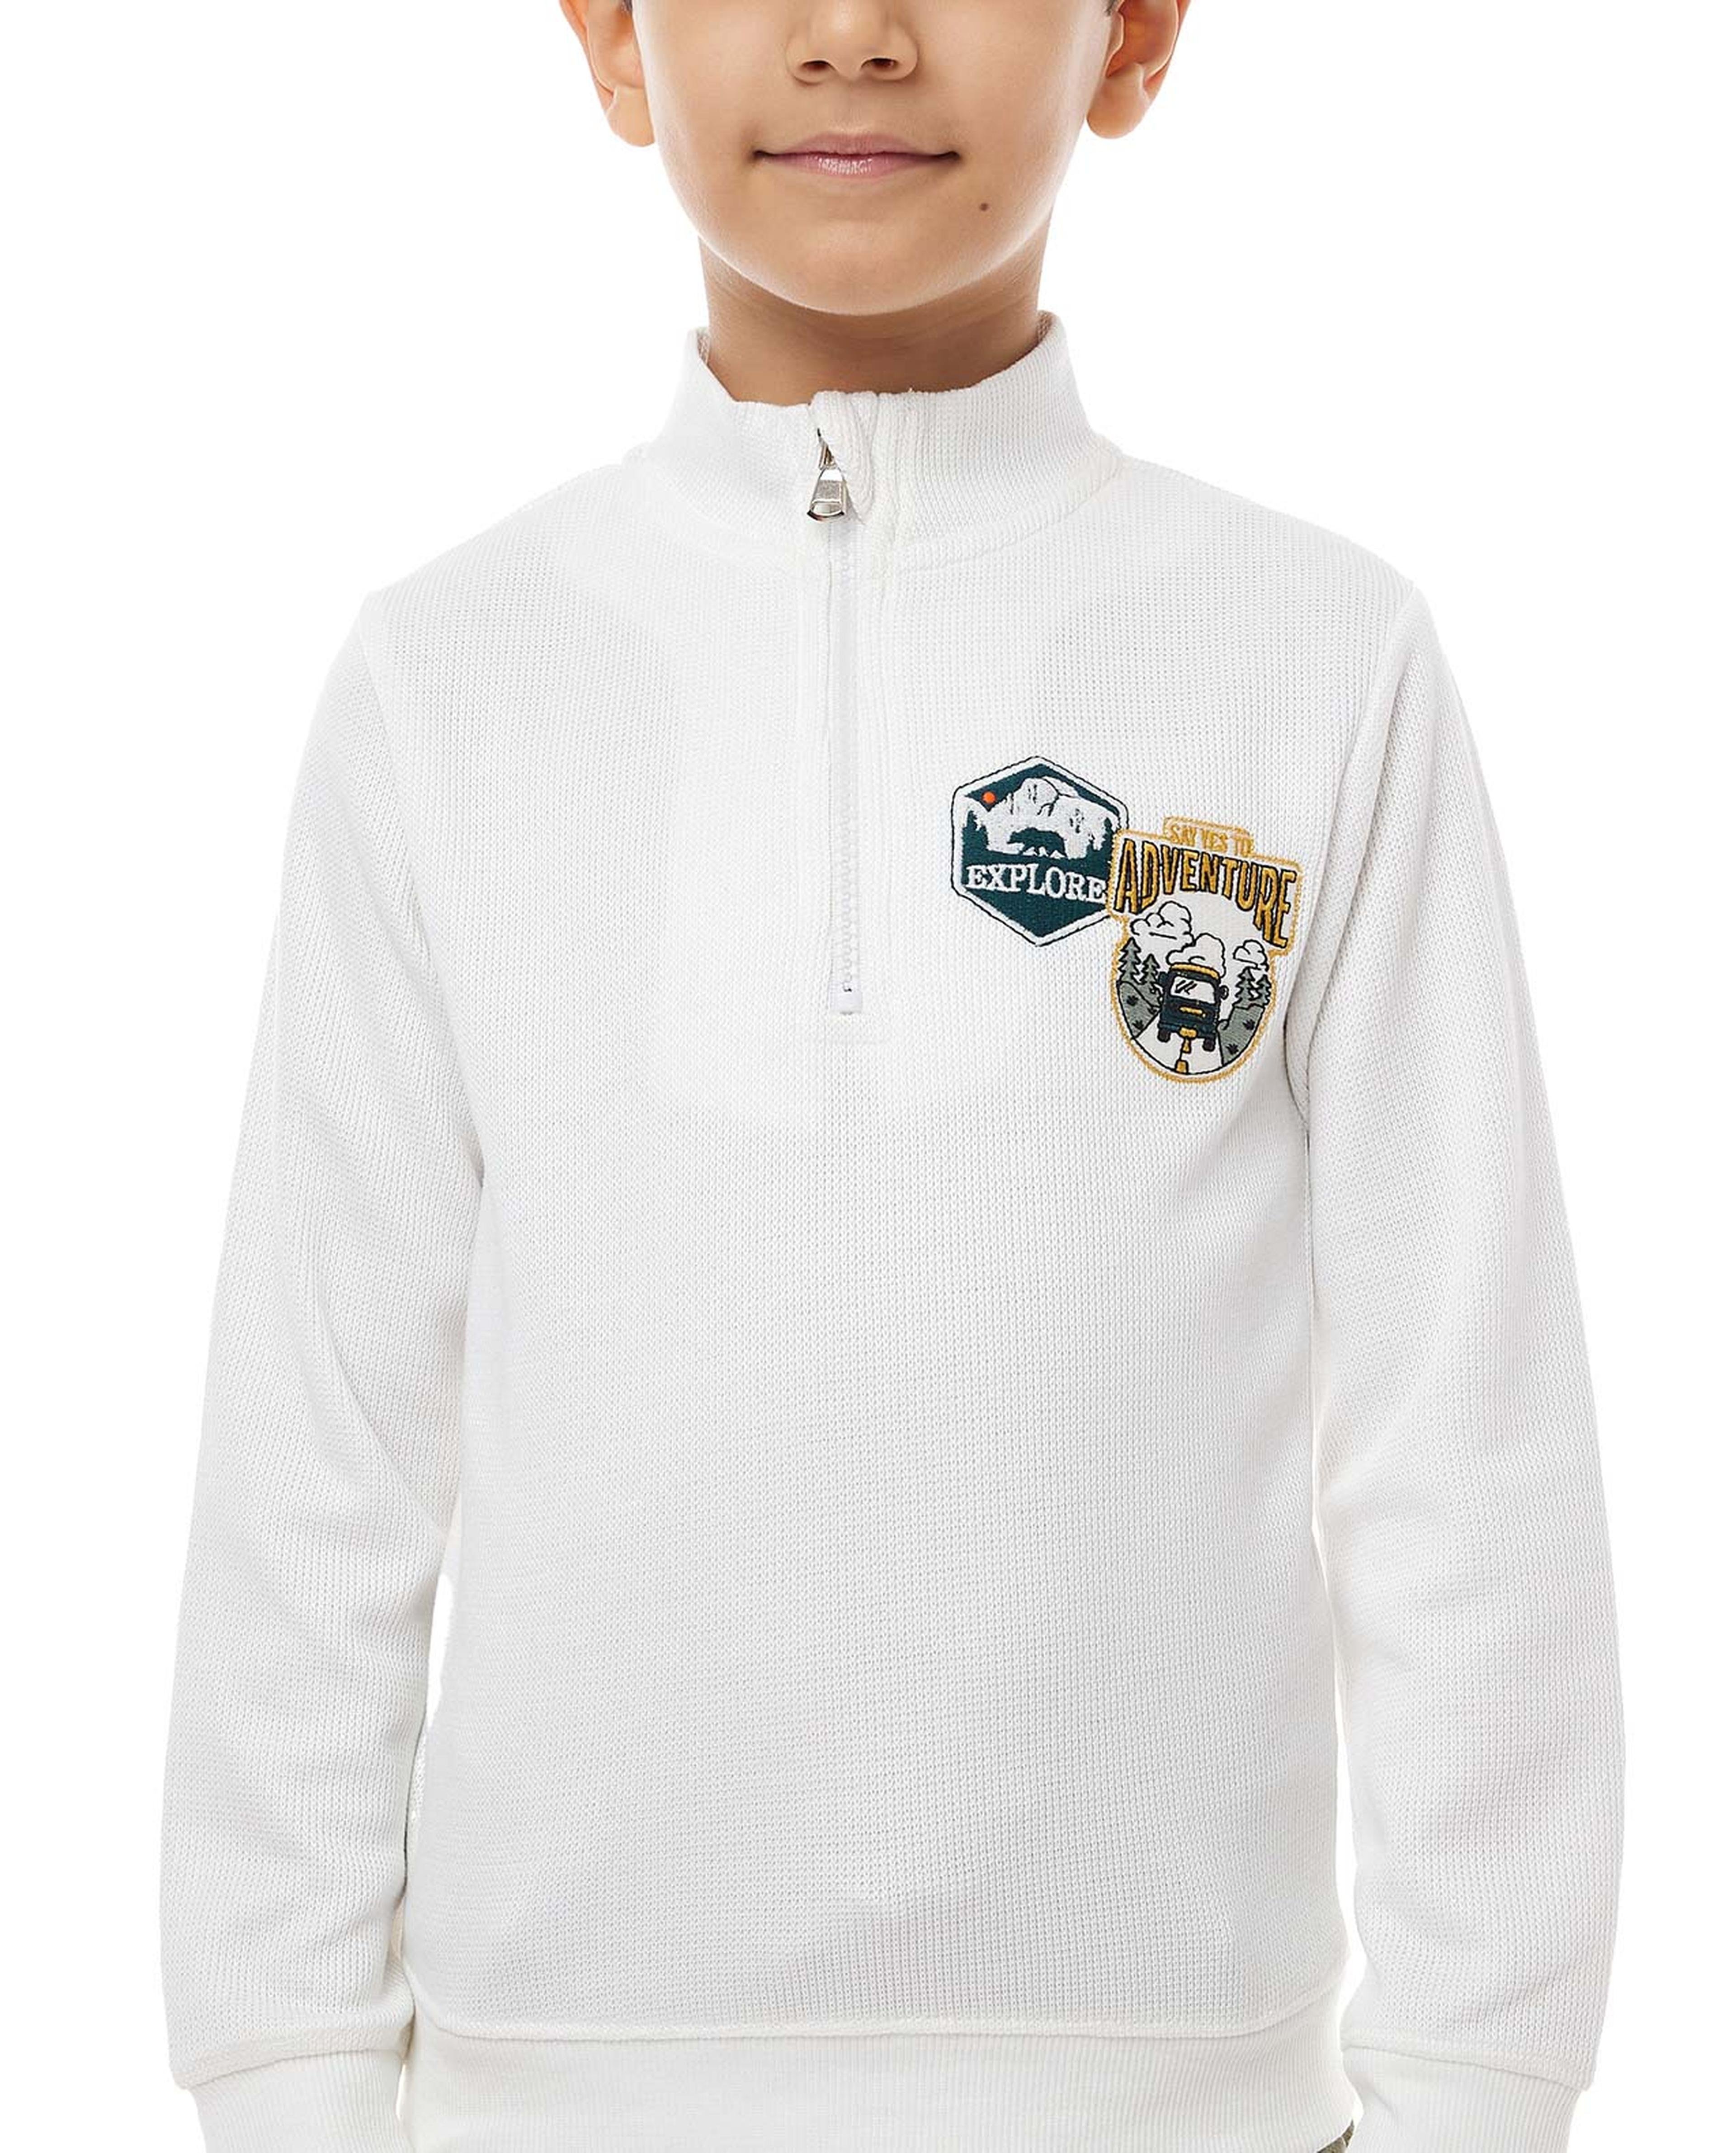 Embroidered Sweatshirt with High Neck and Long Sleeves